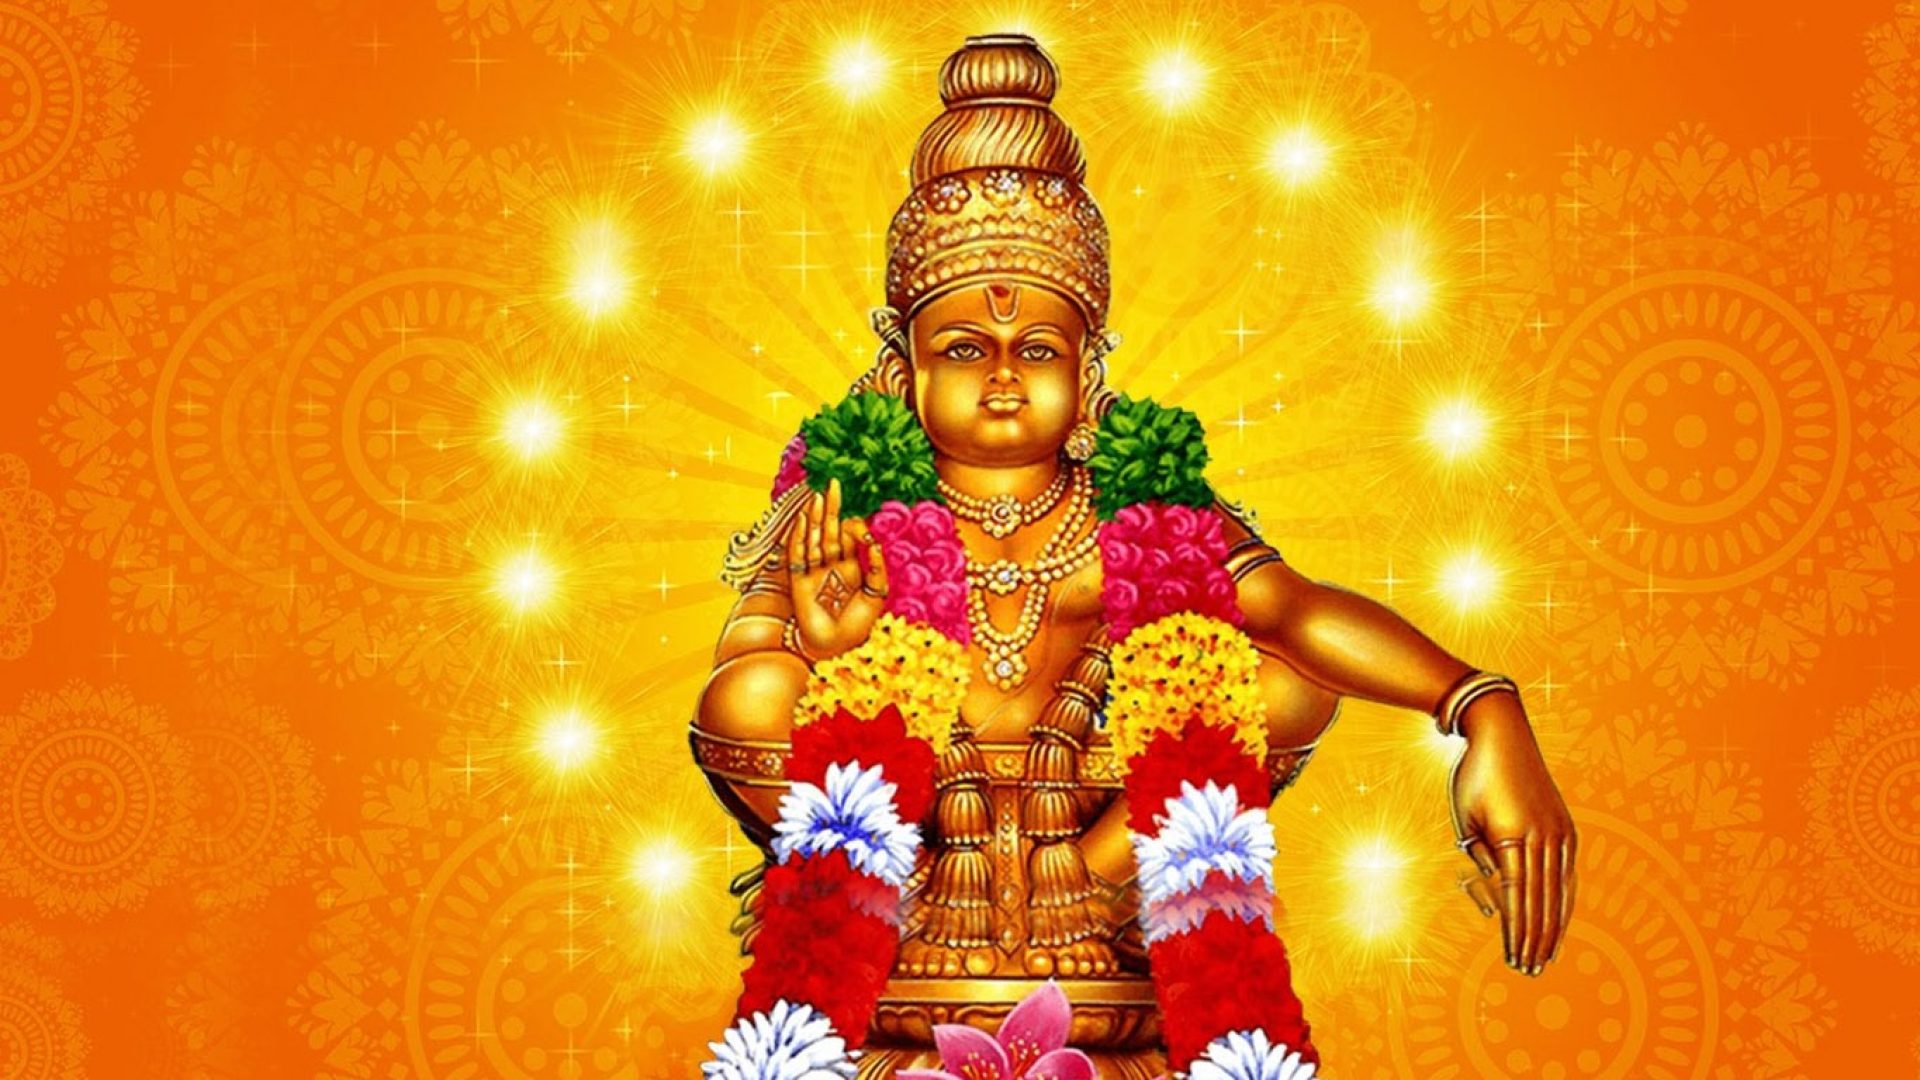 Ayyappa Images Hd 3d Free Download - God HD Wallpapers